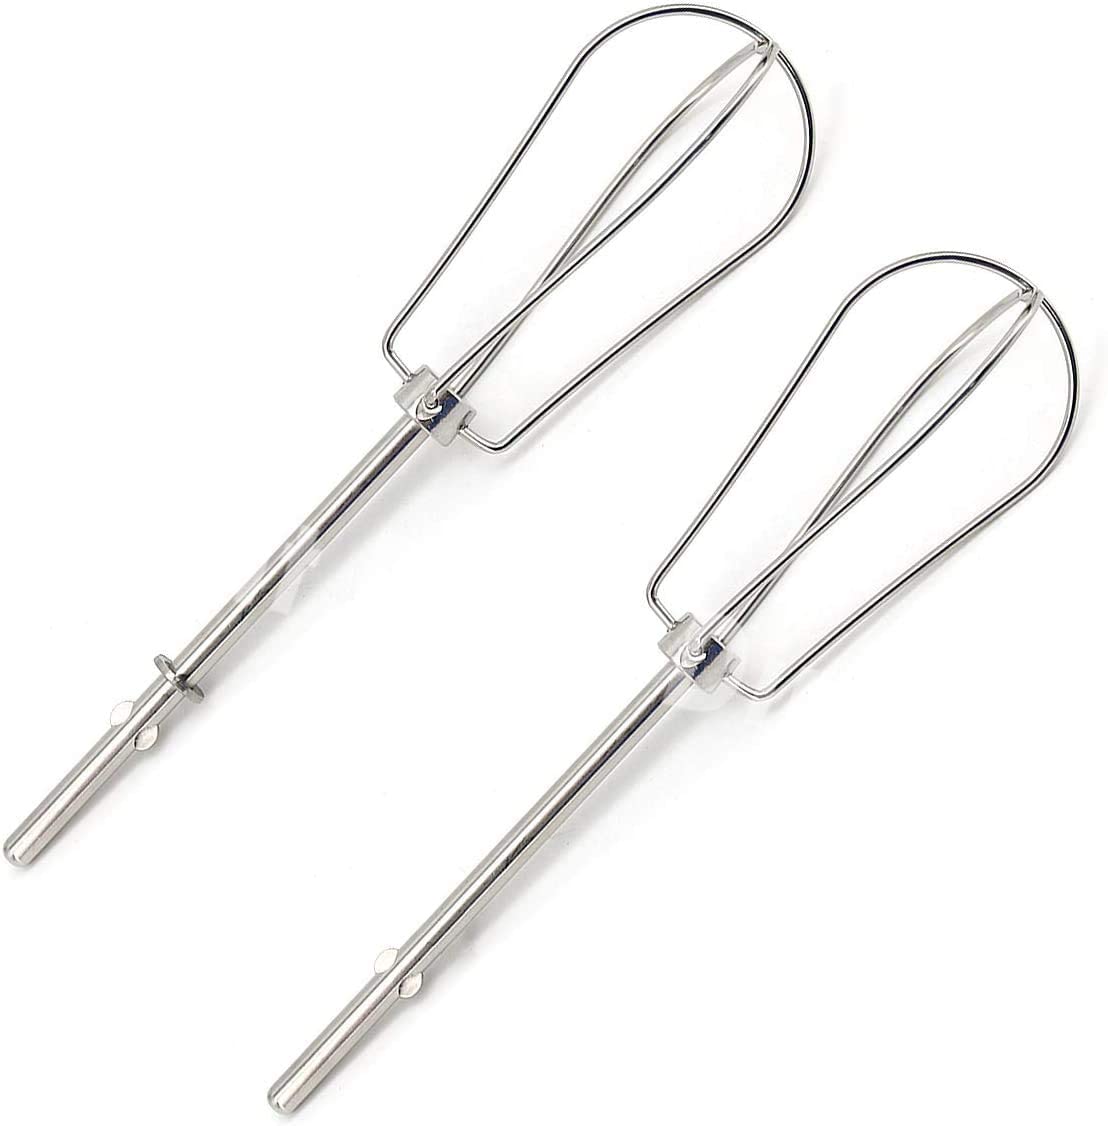 Discount Parts Direct Stainless Hand Mixer Replacement Beaters, 2-Count